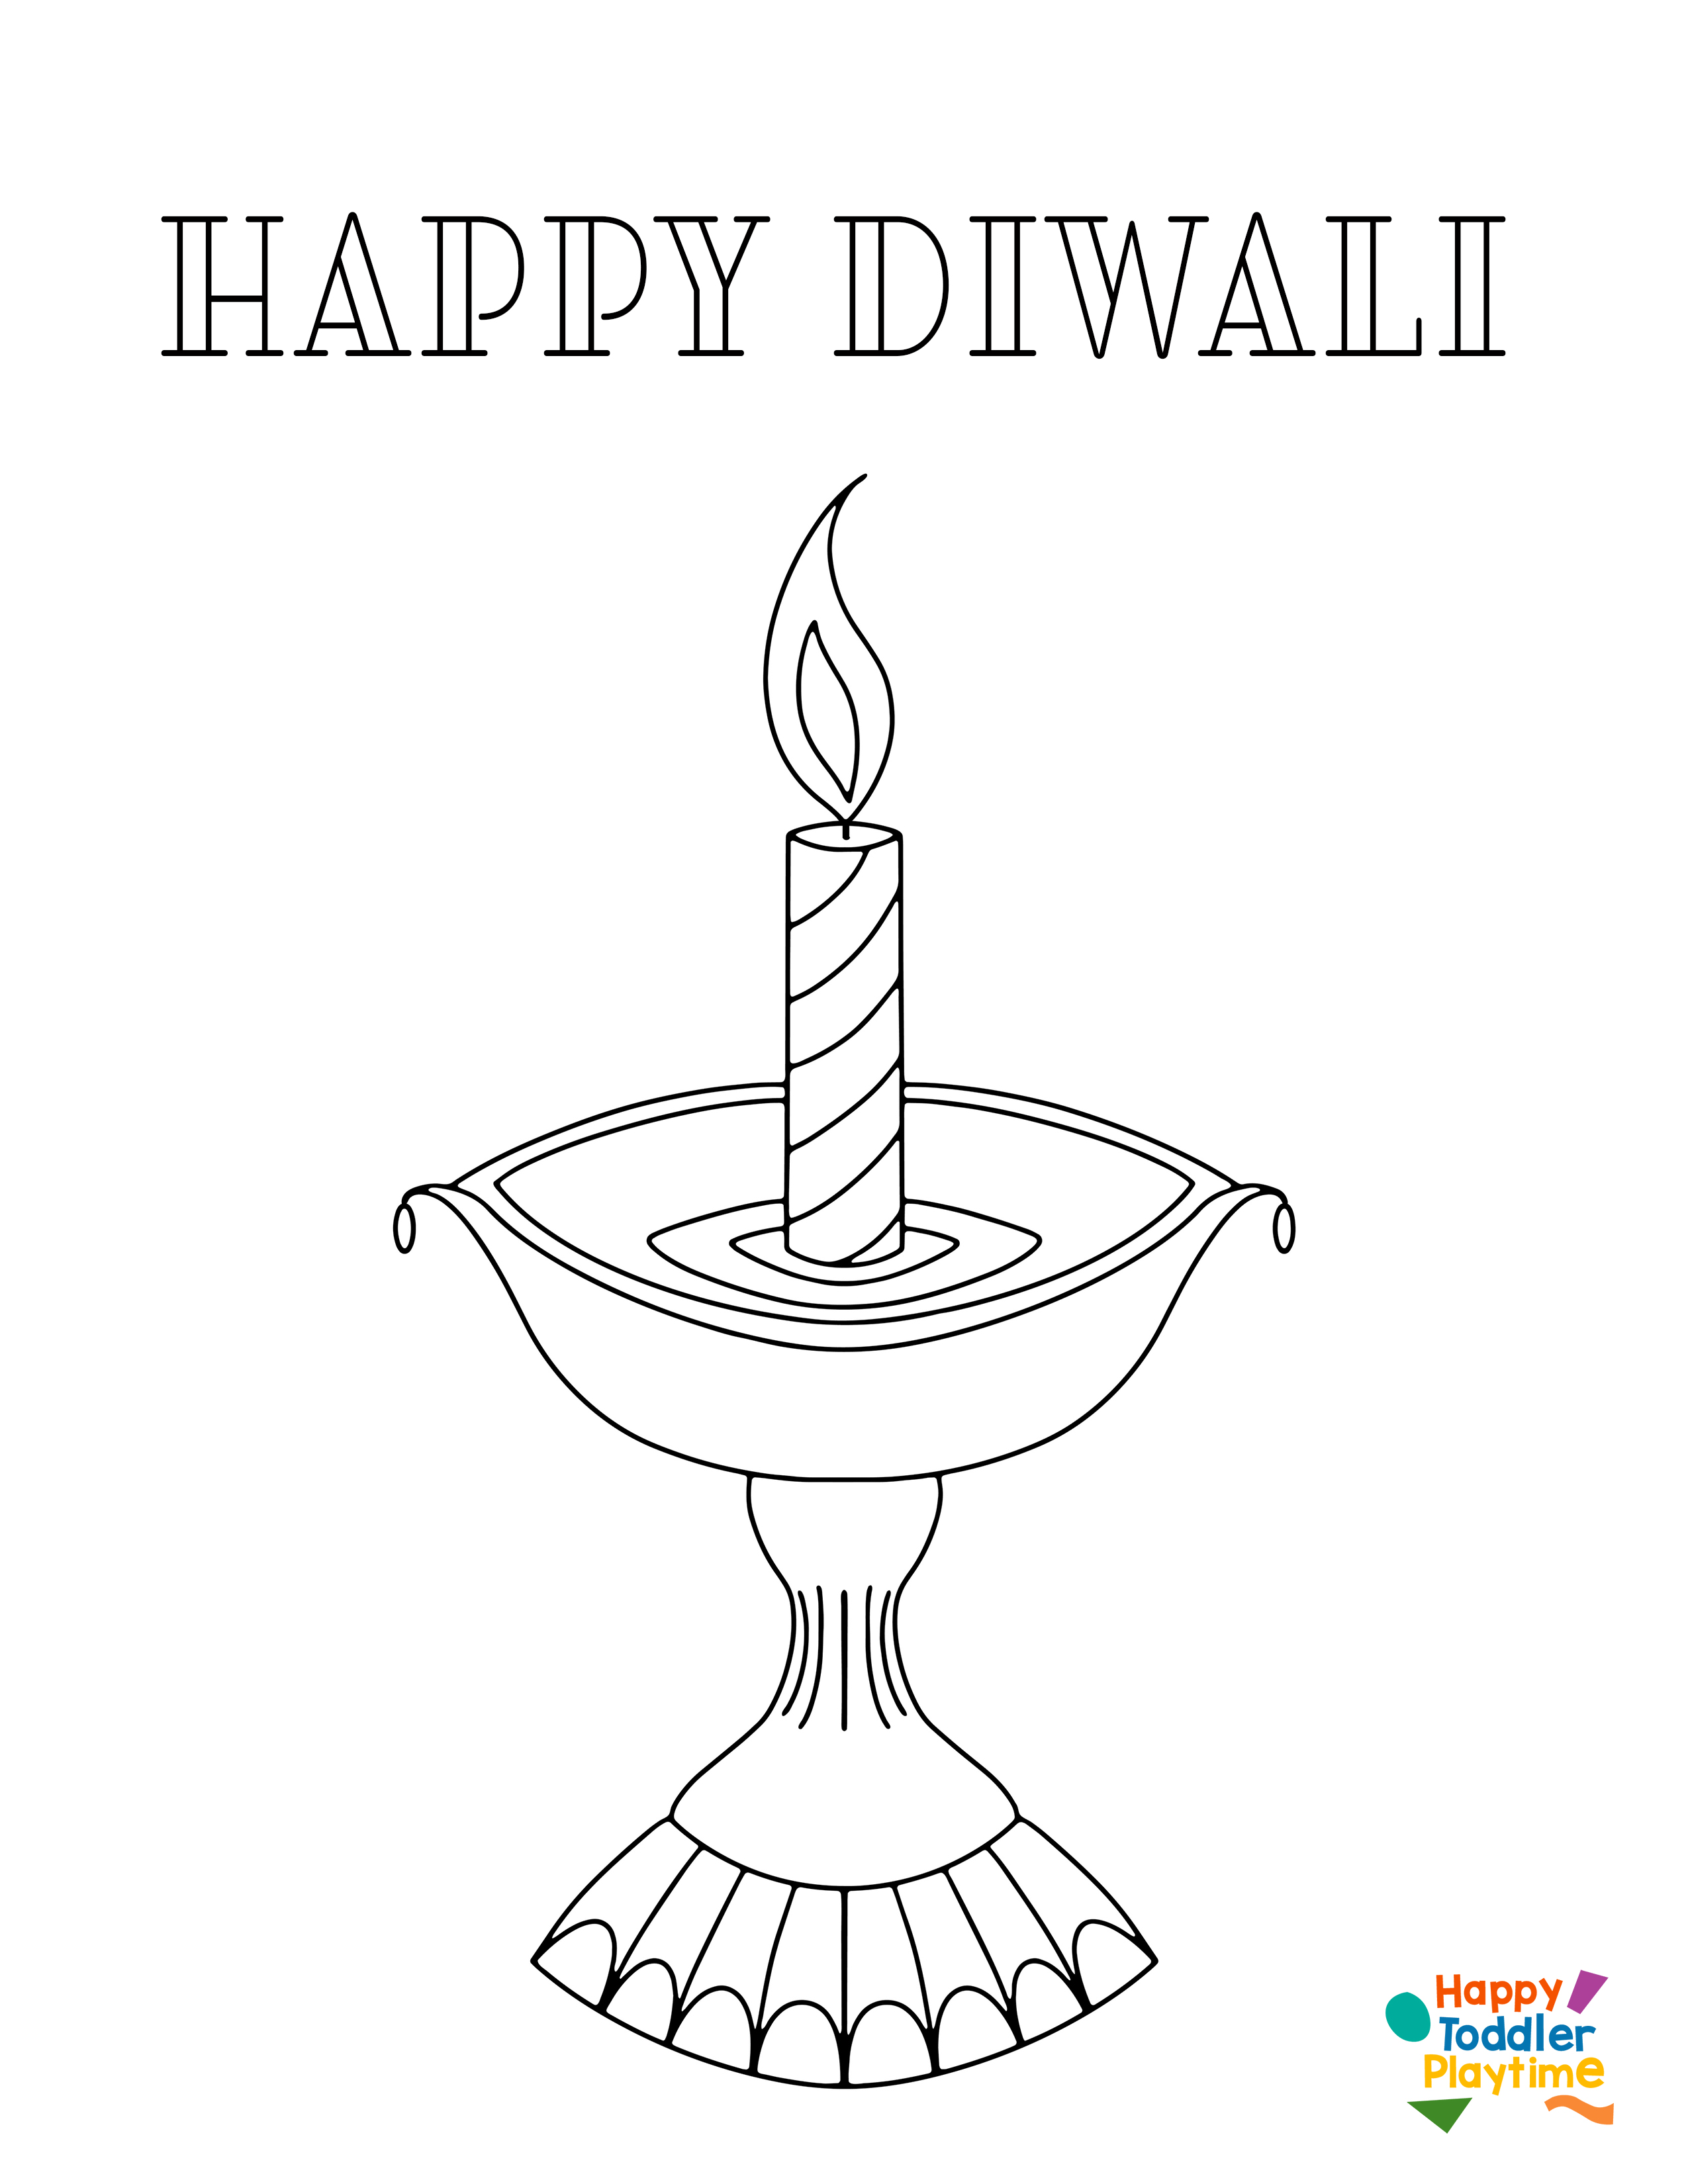 Happy Diwali Greetings - Bookosmia :: India's #1 Publisher for kids, by kids-saigonsouth.com.vn